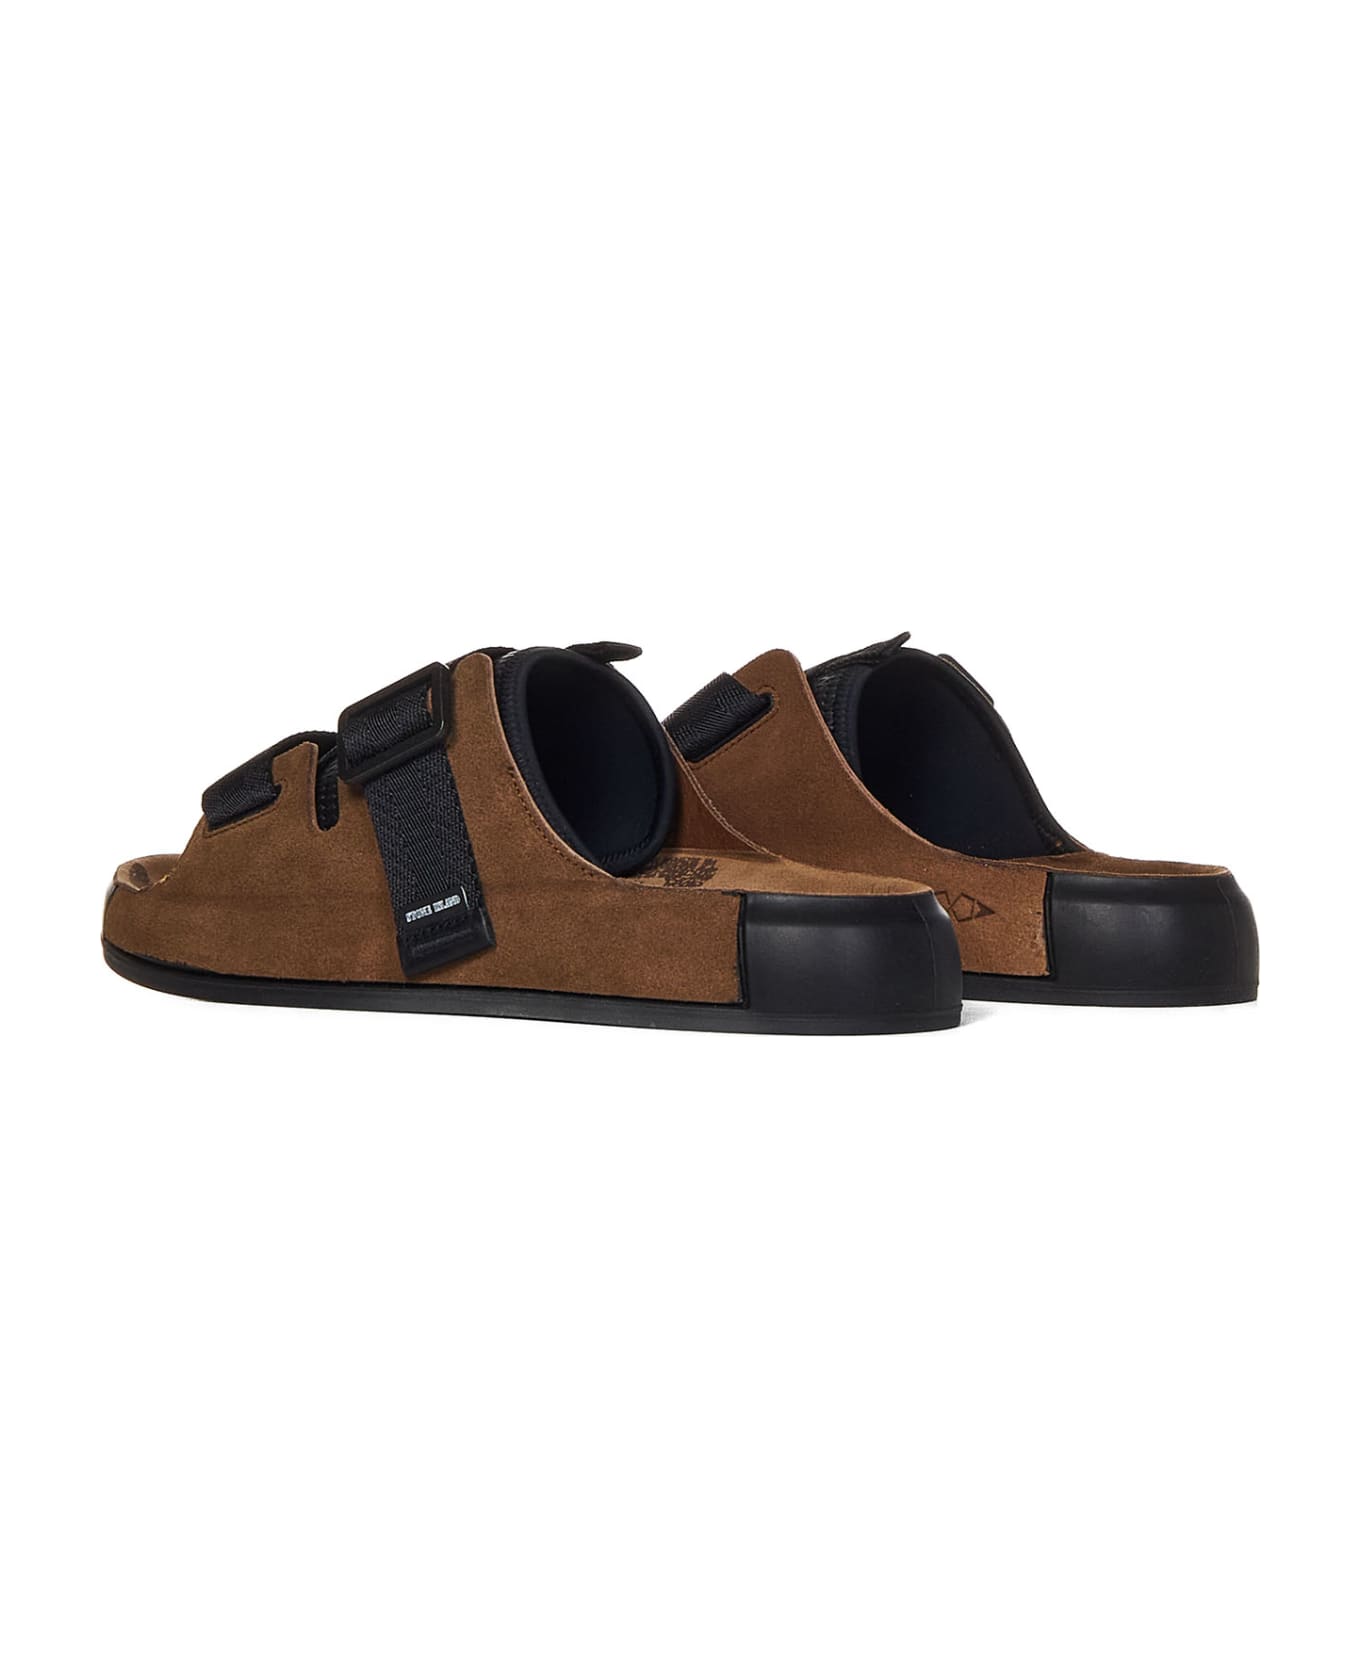 Stone Island Shadow Project Sandals - Brown